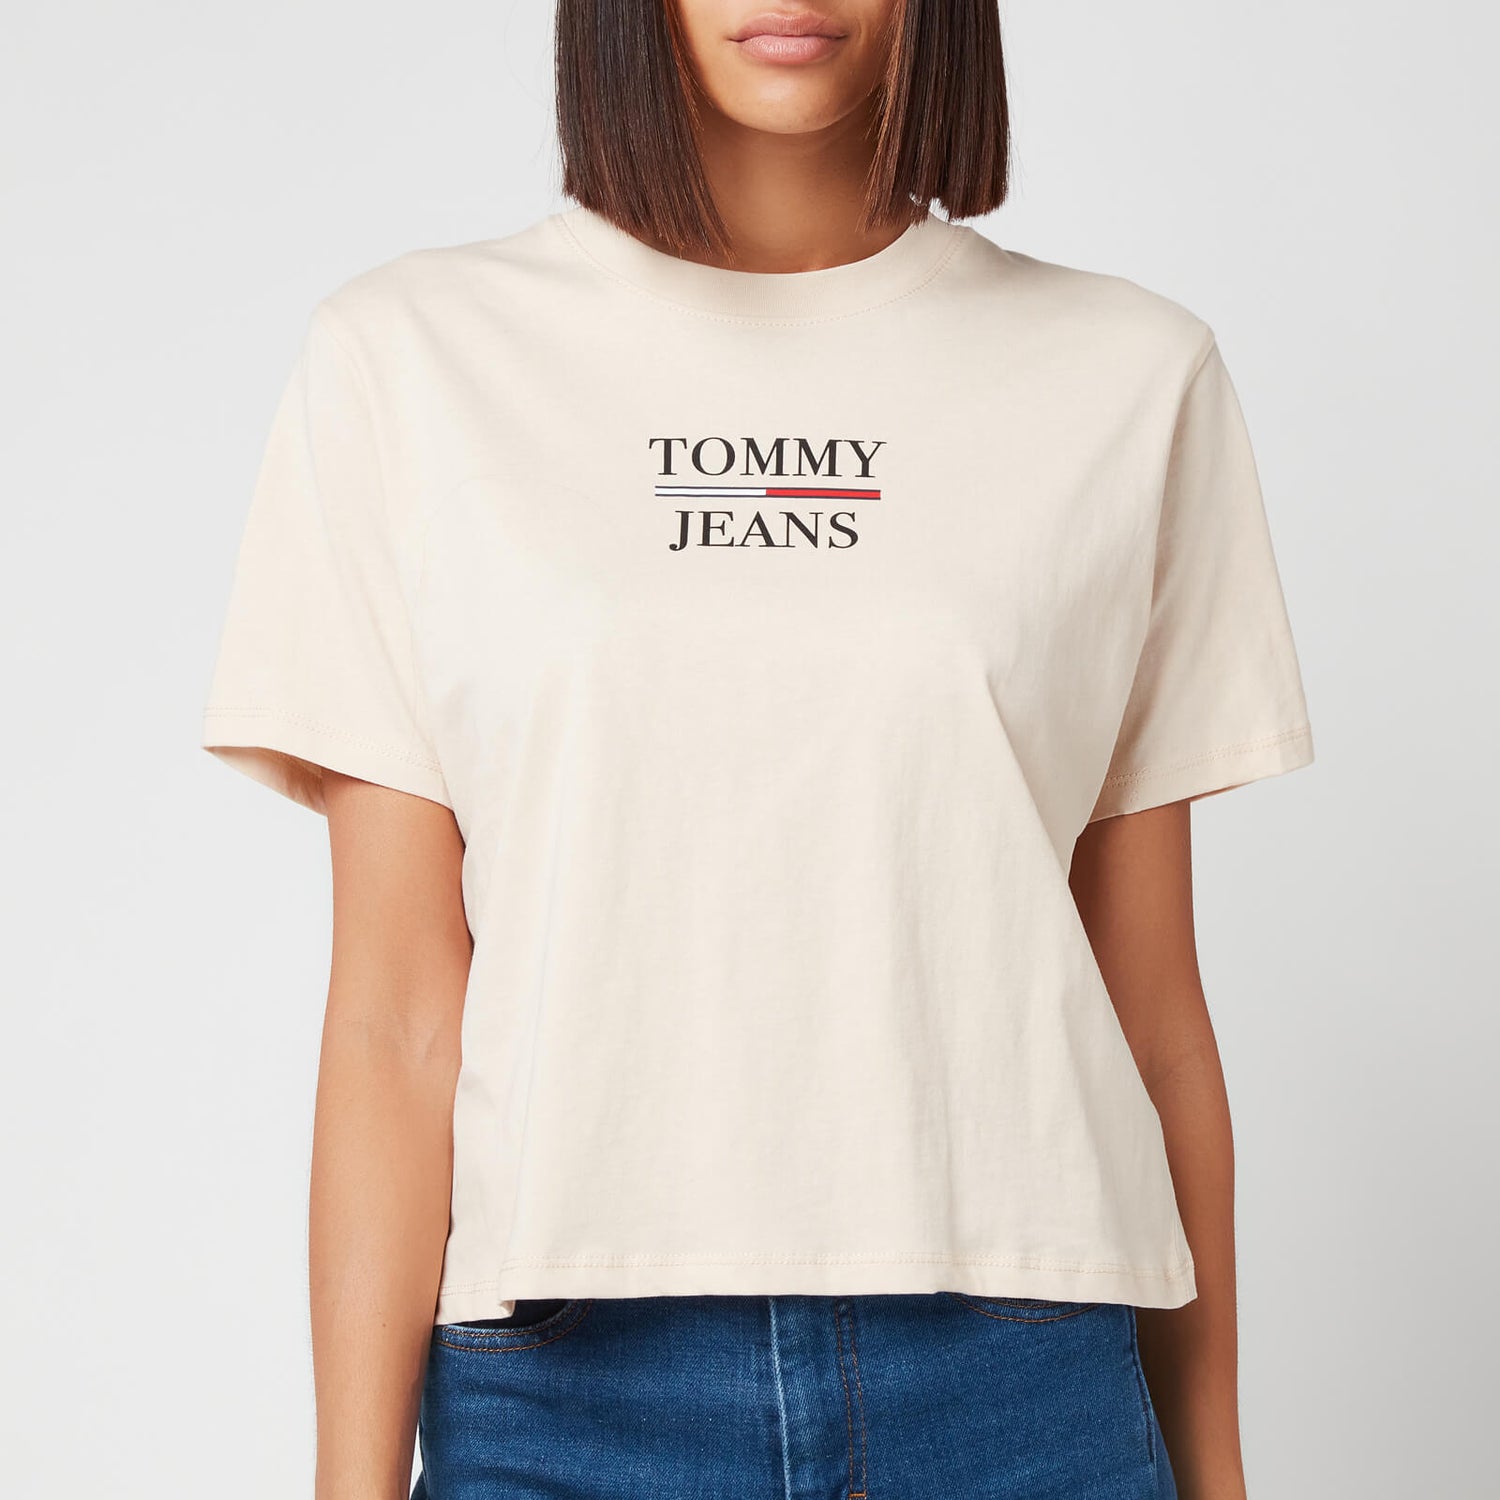 Tommy Jeans Women's Tjw Bxy Crop Tommy Tee - Smooth Stone